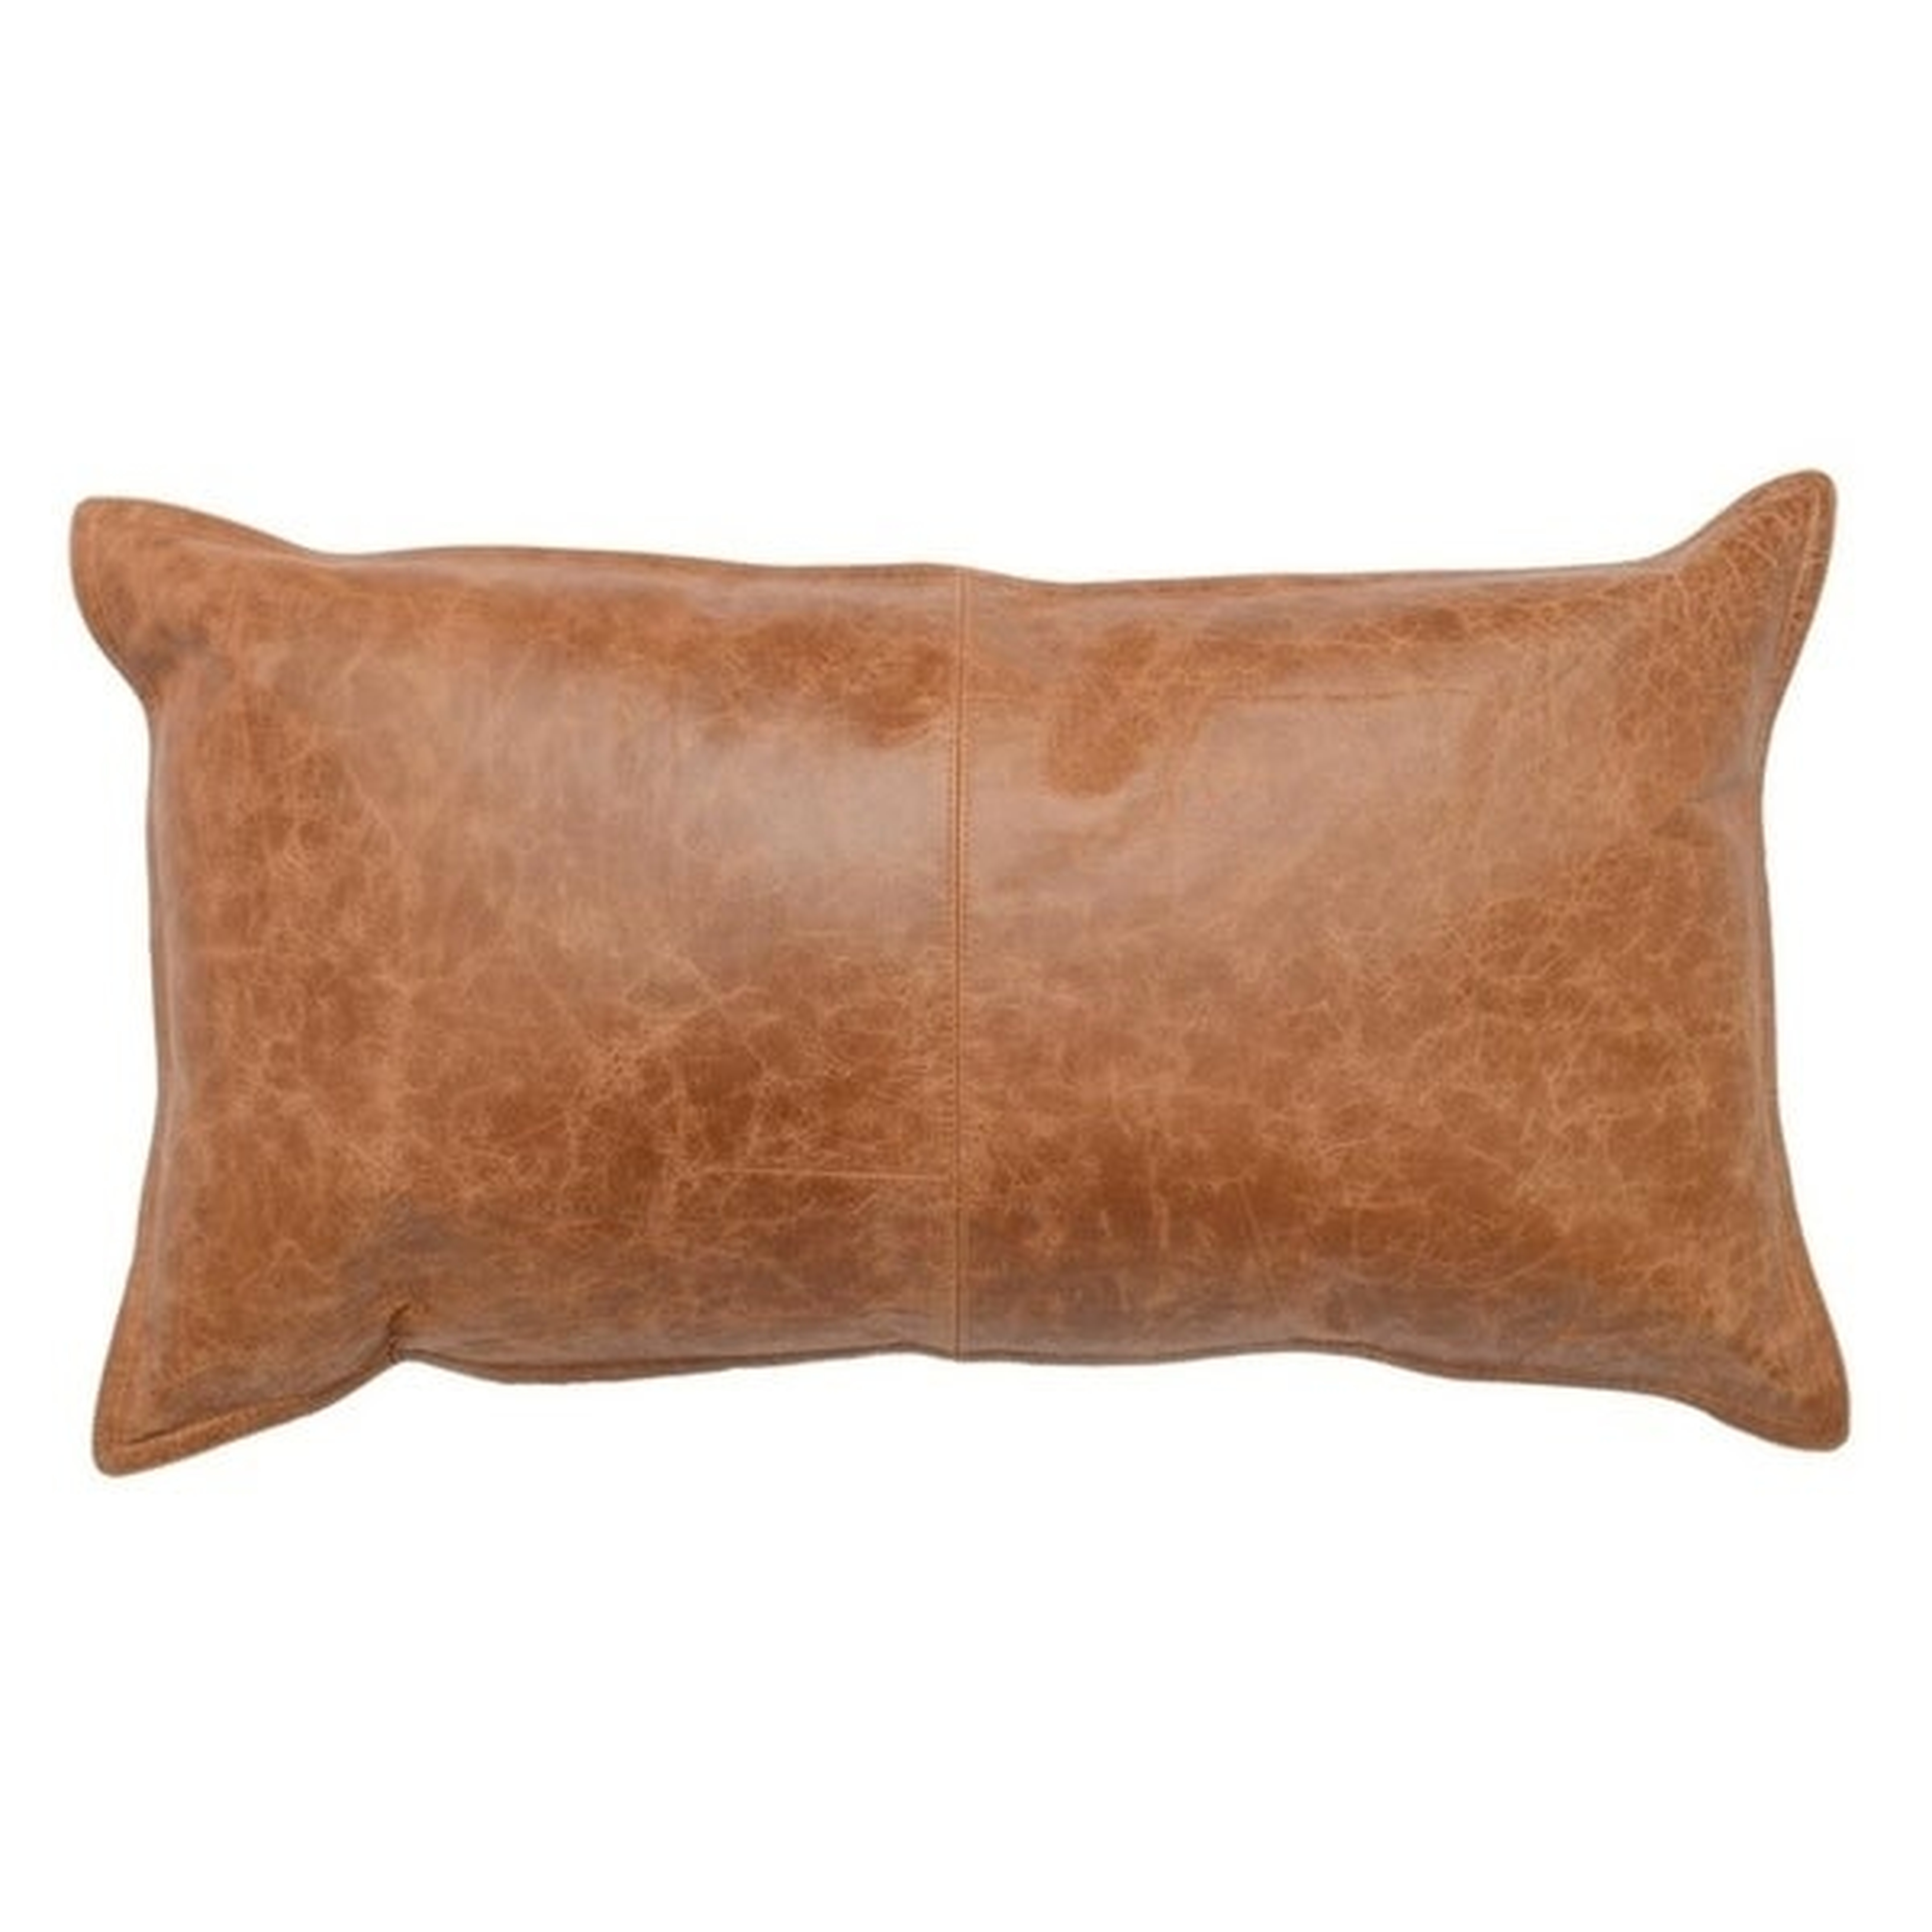 Strick & Bolton Lindi Leather 14-inch x 26-inch Throw Pillow - Overstock